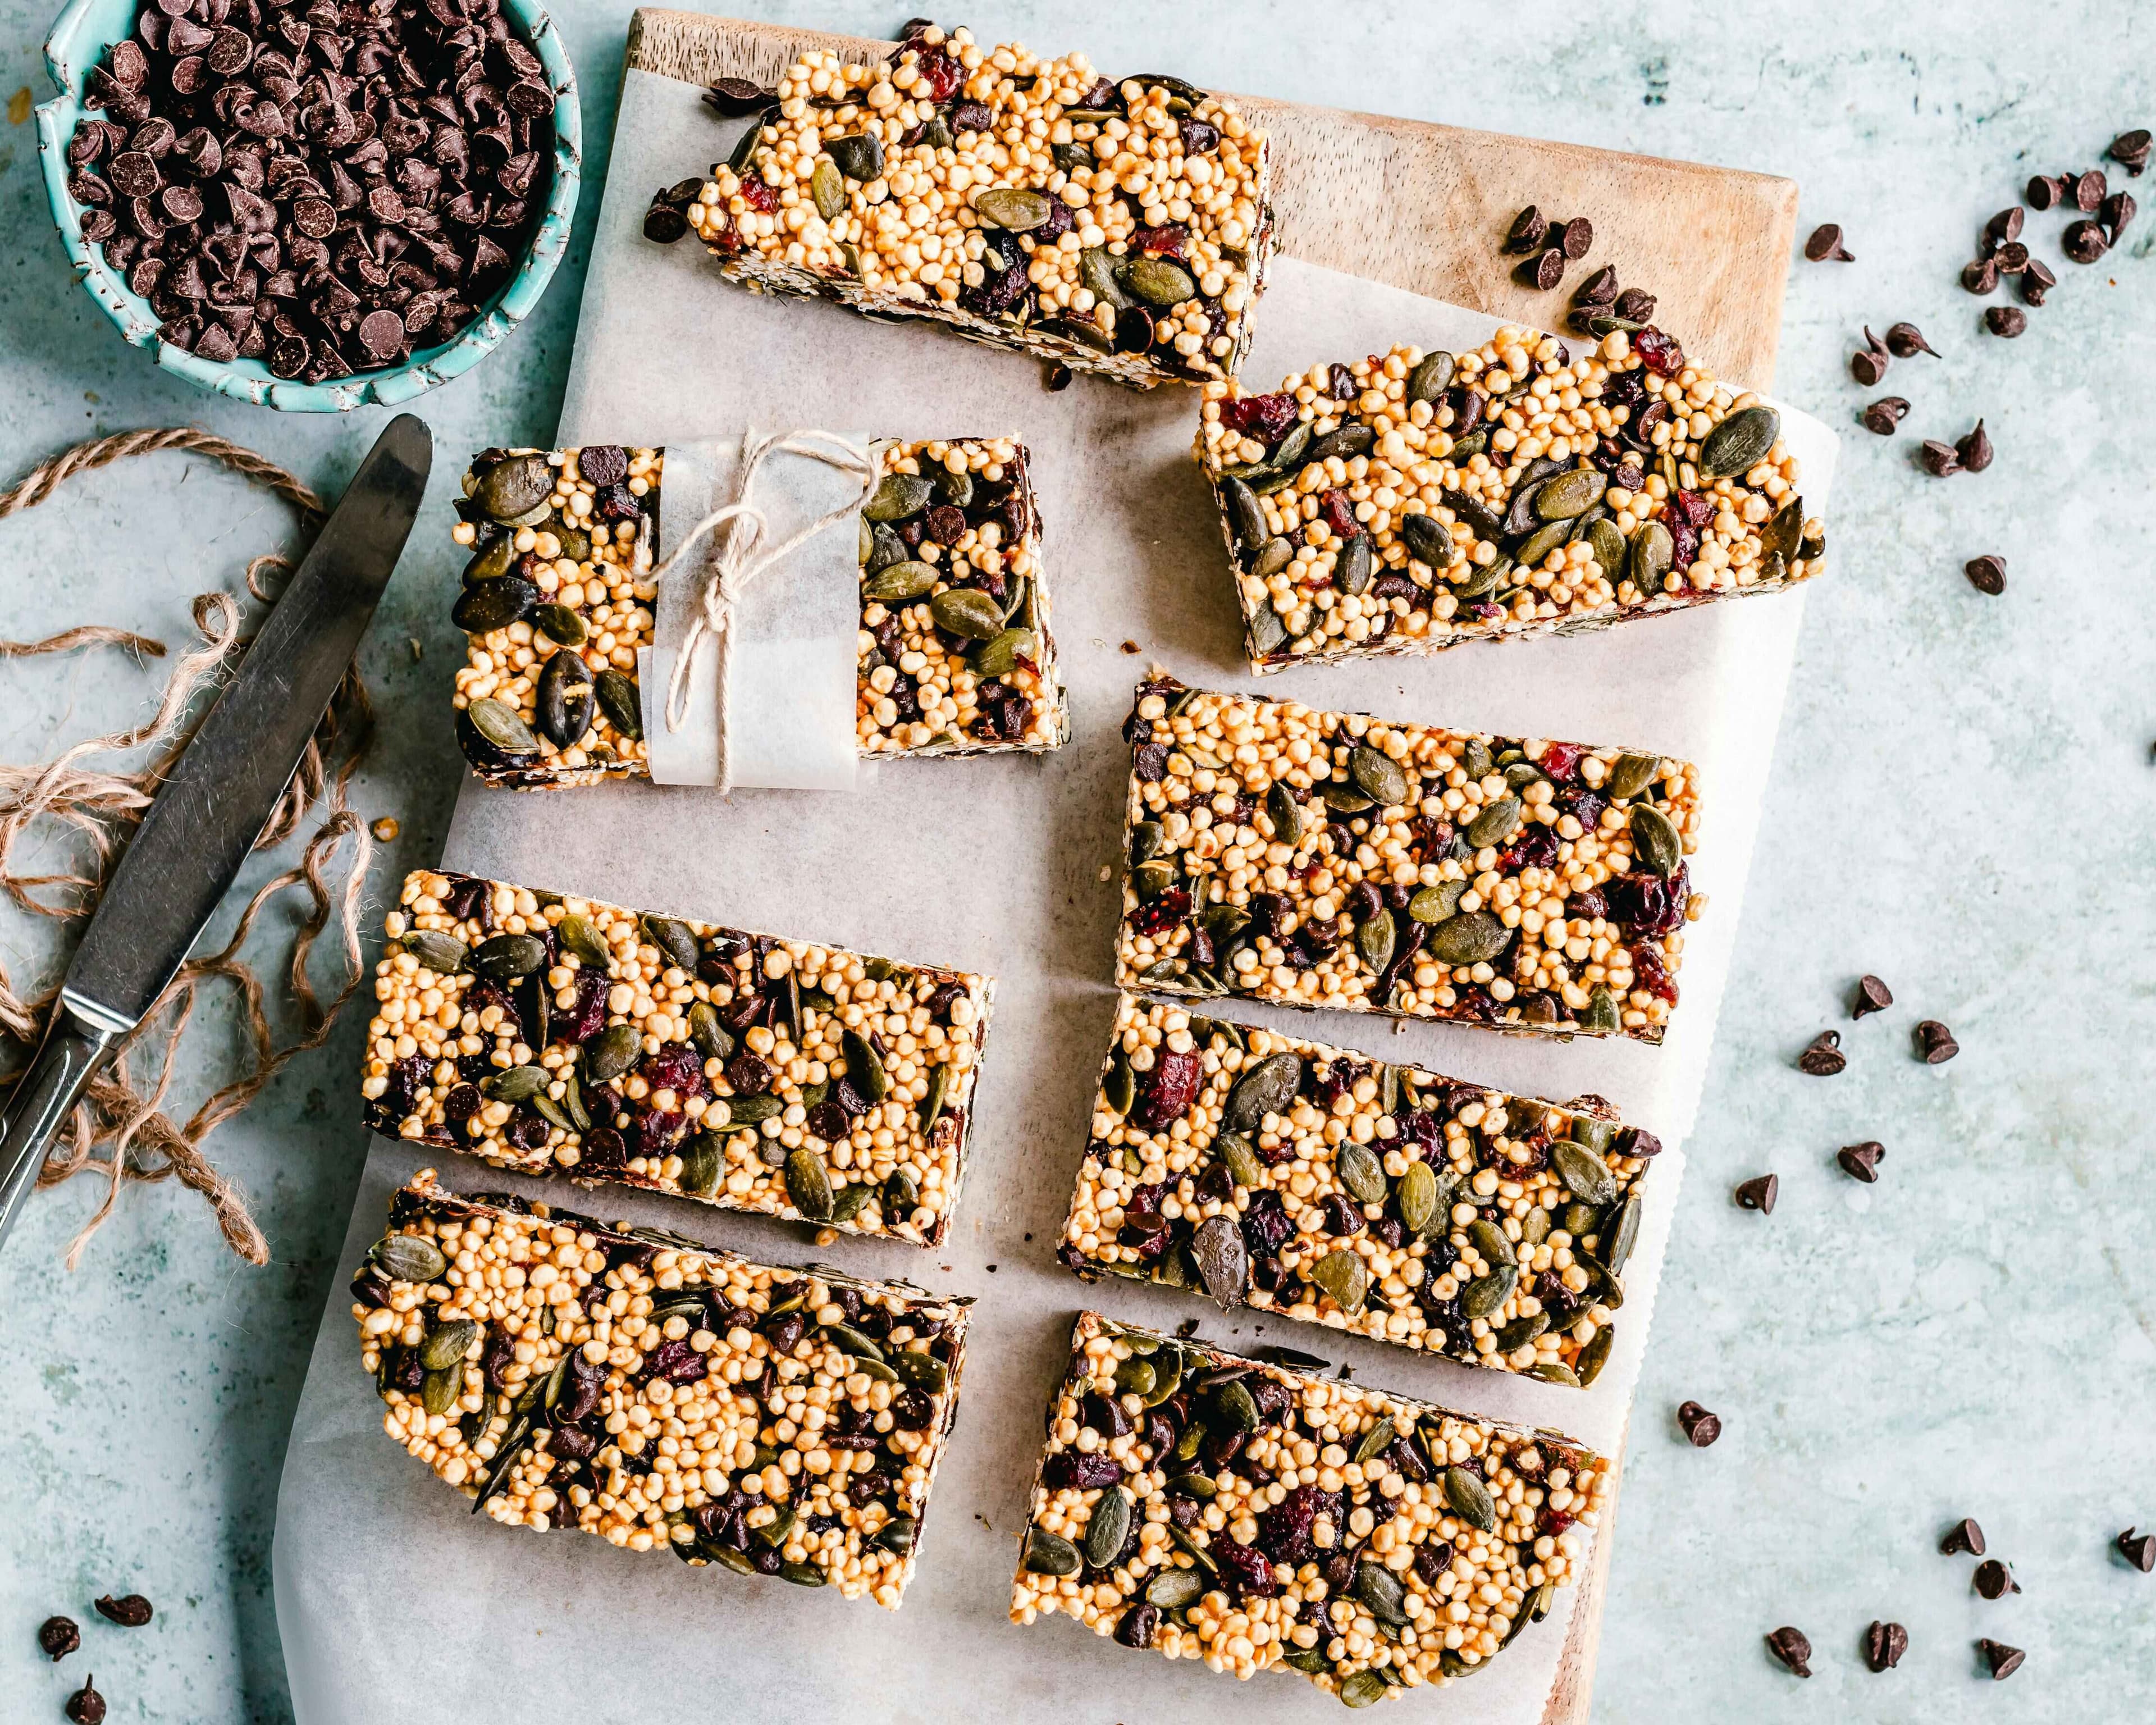 Dessert-Inspired Snack Bars for Cocktail Nights With Friends And Loved Ones